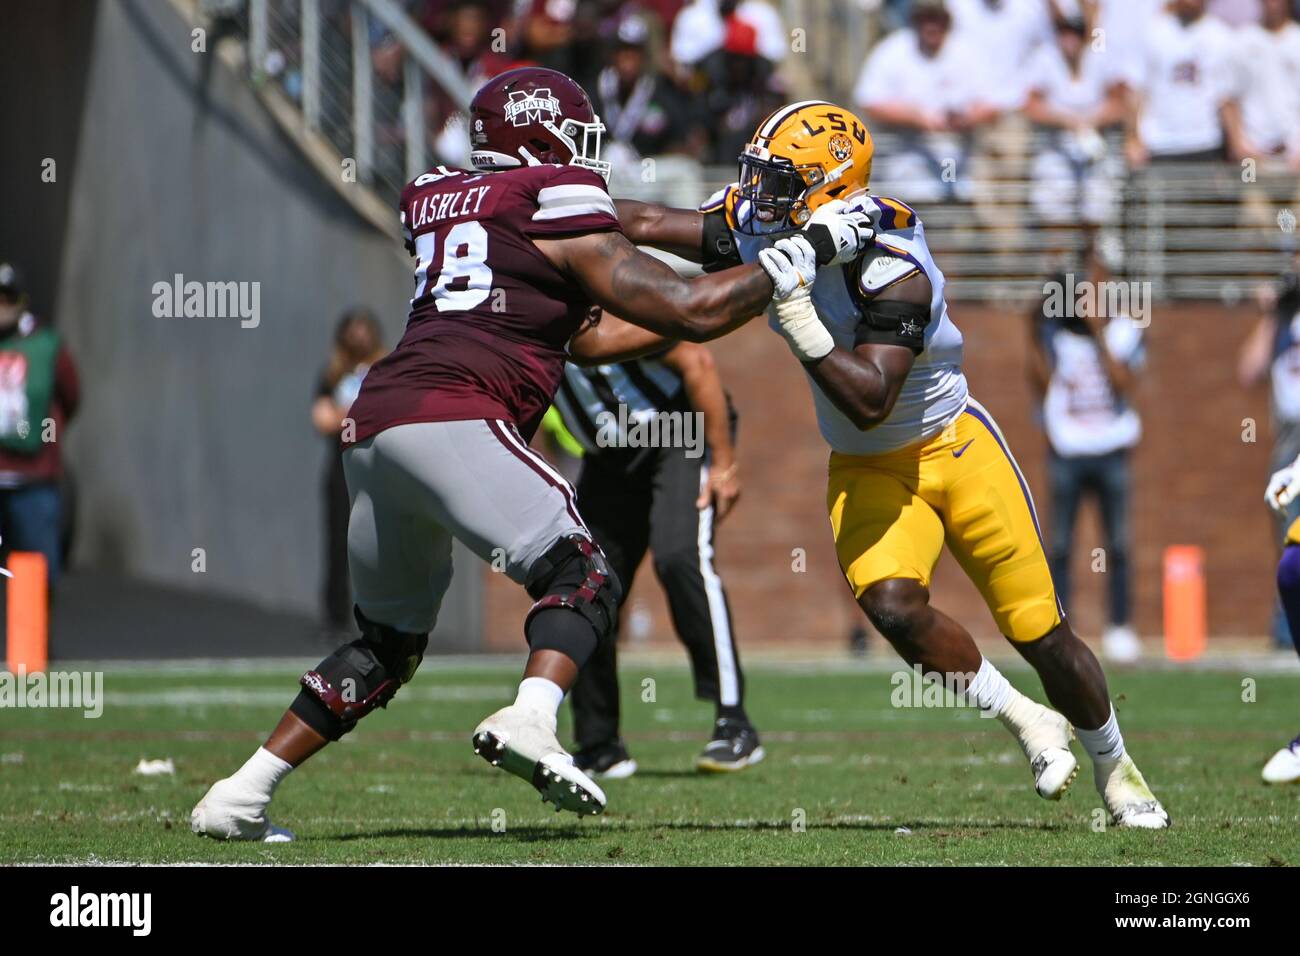 Starkville, MS, USA. 25th Sep, 2021. LSU Tigers defensive end Ali Gaye (11) ties up with Mississippi State Bulldogs offensive lineman Scott Lashley (78) during the NCAA football game between the LSU Tigers and the Mississippi State Bulldogs at Davis Wade Stadium in Starkville, MS. Kevin Langley/CSM/Alamy Live News Stock Photo